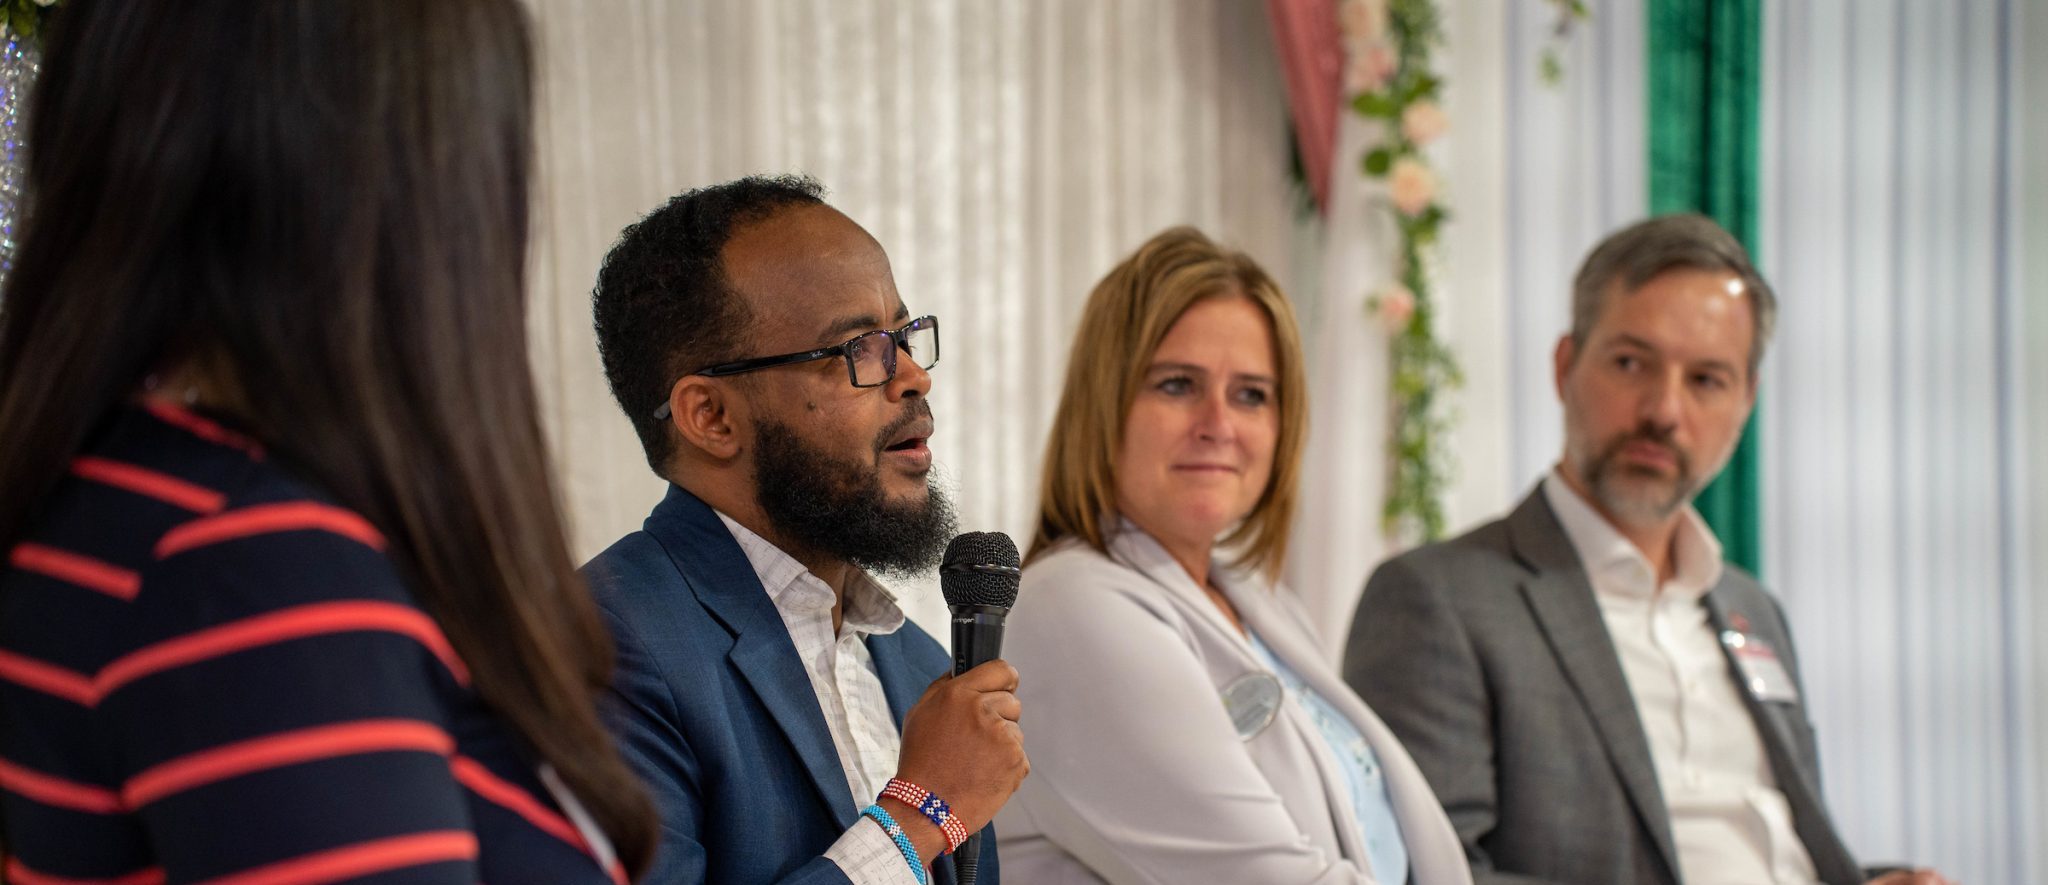 Jama Mohamed with Morgan Family Foundation speaks on a panel in St. Cloud with fellow community leaders Greta Stark-Kraker at Central Minnesota Community Foundation and Matt Varilek at Initiative Foundation.